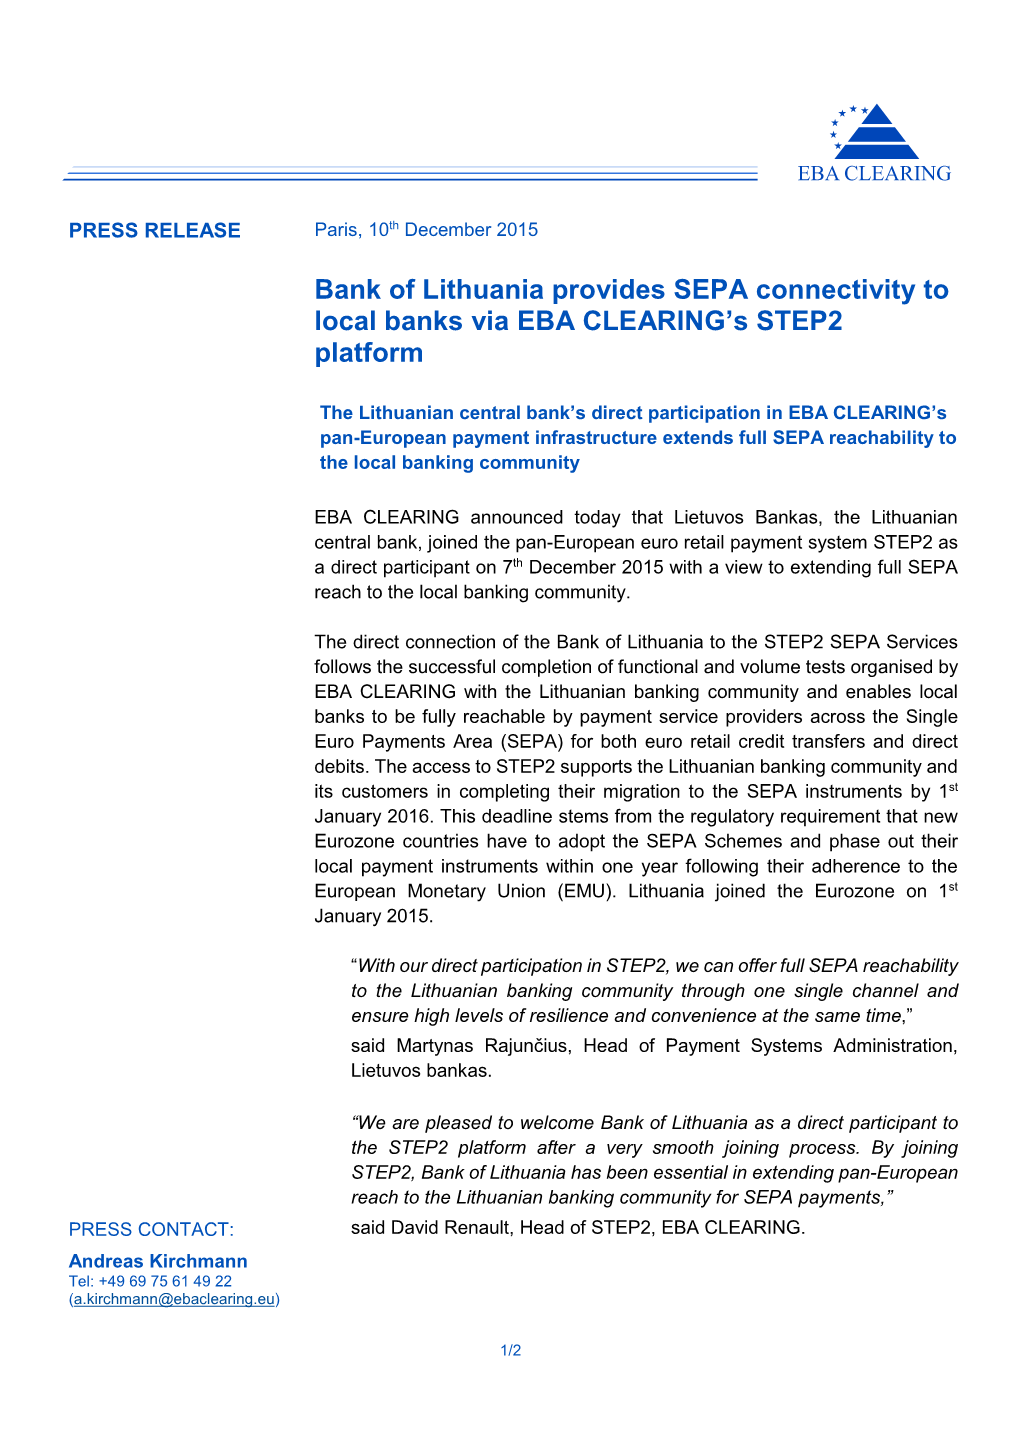 Bank of Lithuania Provides SEPA Connectivity to Local Banks Via EBA CLEARING's STEP2 Platform